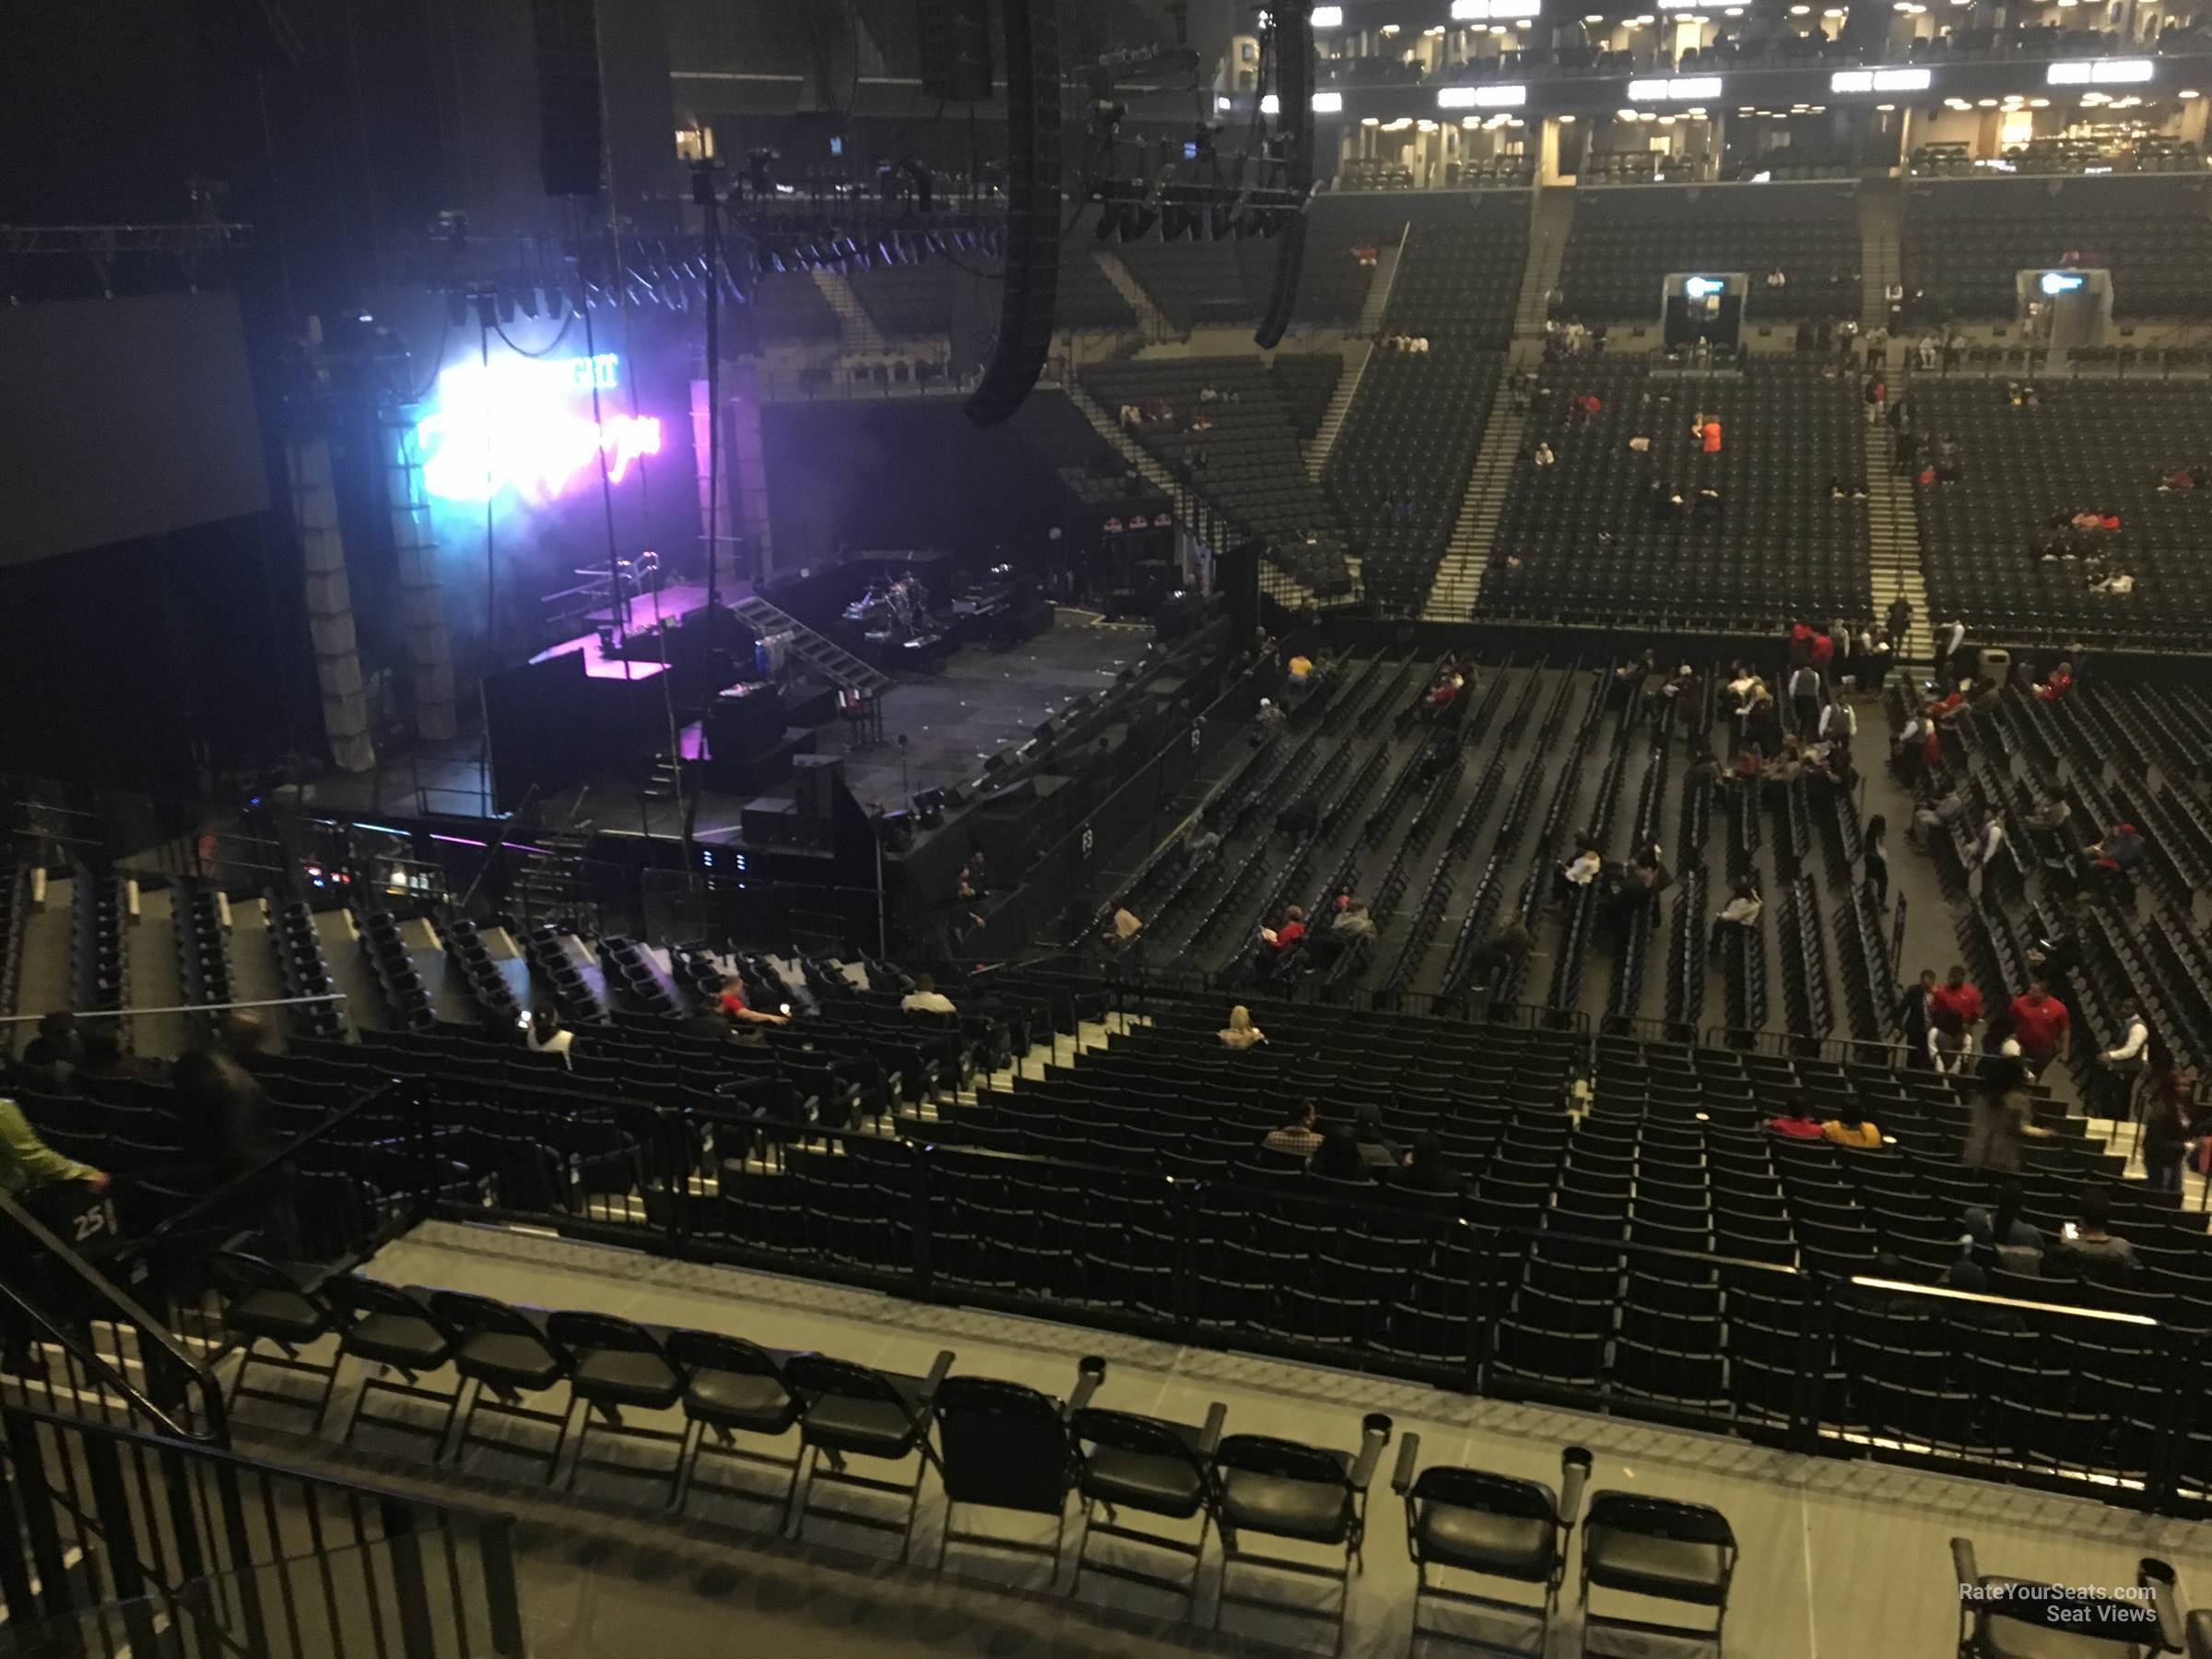 section 125, row 6 seat view  for concert - barclays center